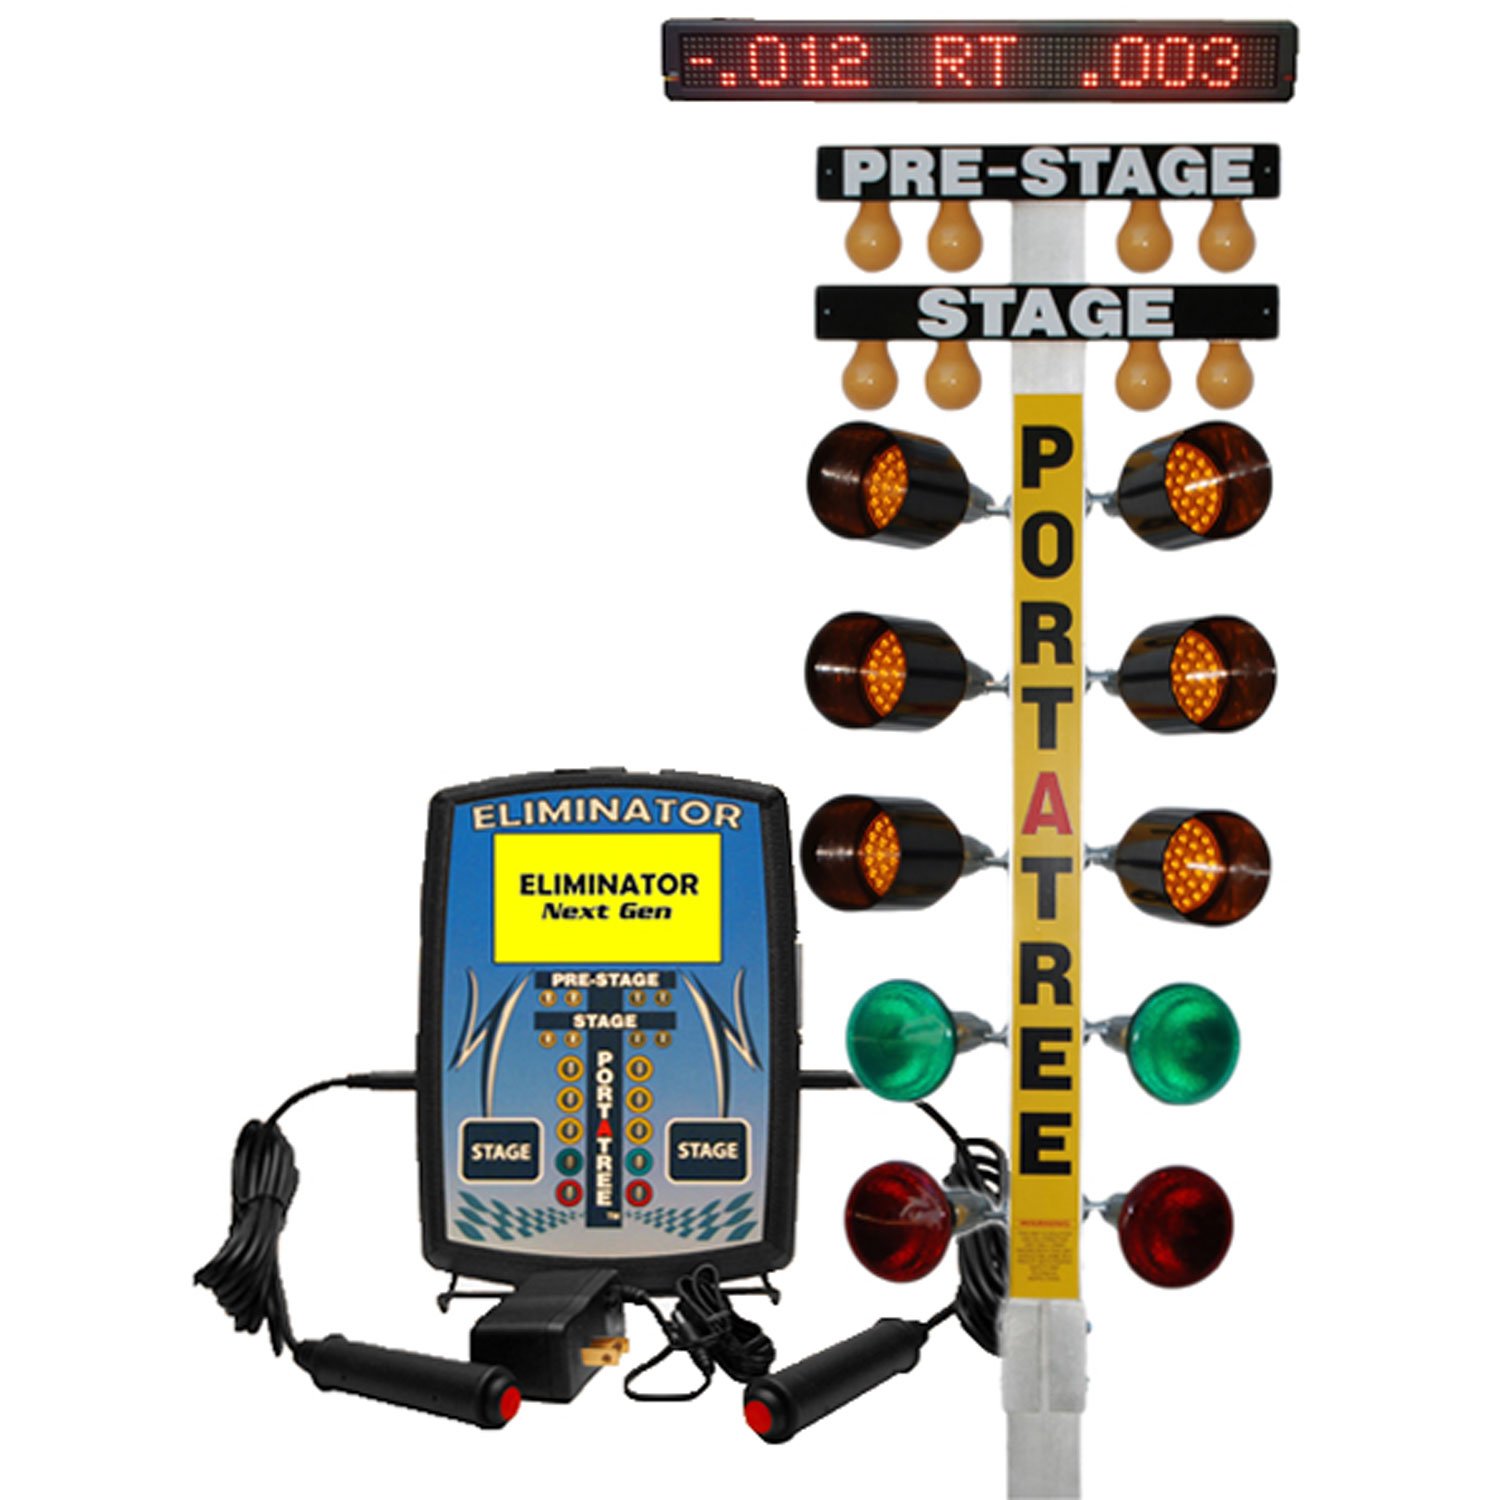 Eliminator Next Gen with National Event Tree with LED Bulbs and 2" x 15 Character Display